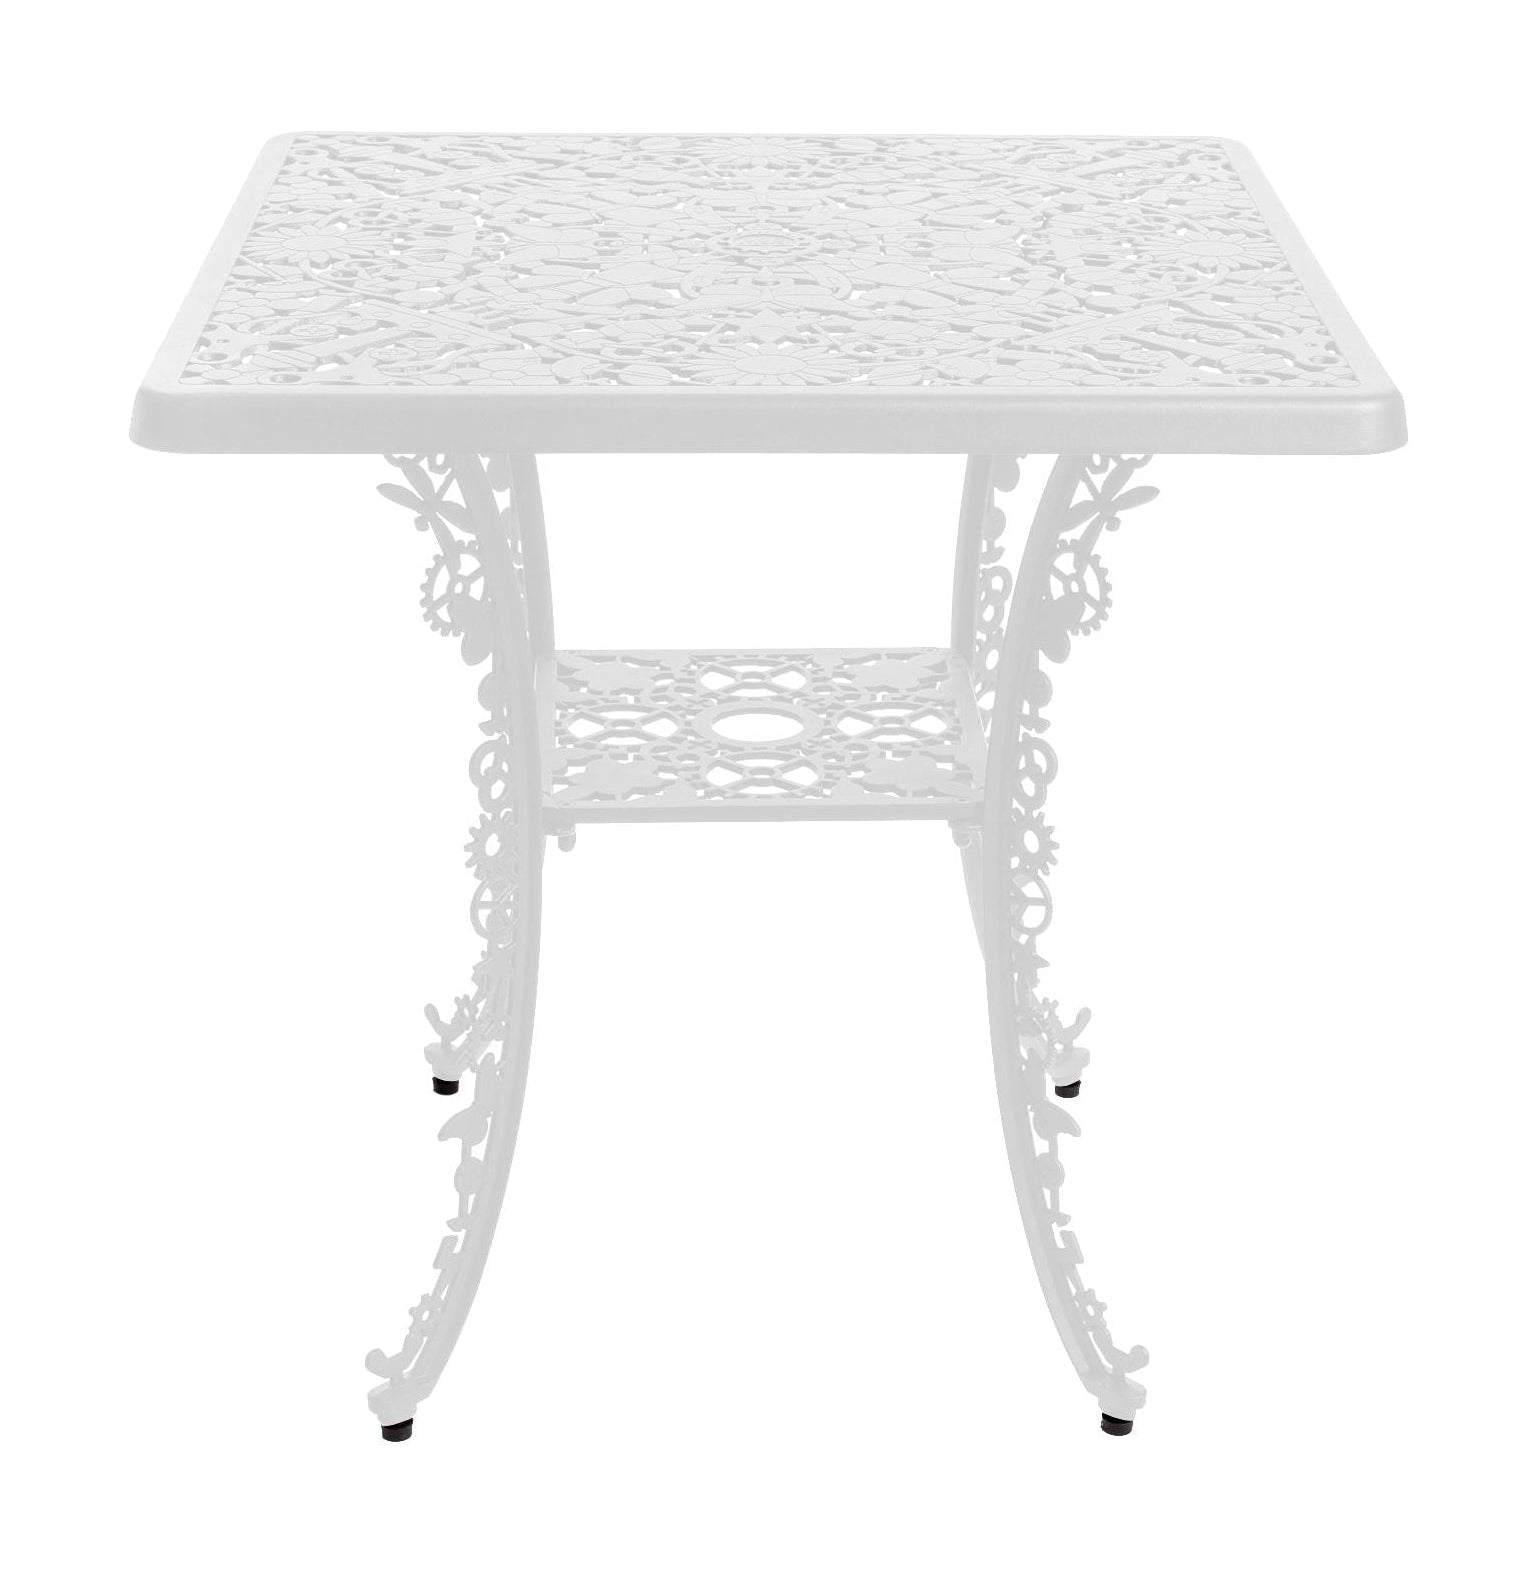 Seletti Industry Square Table, White